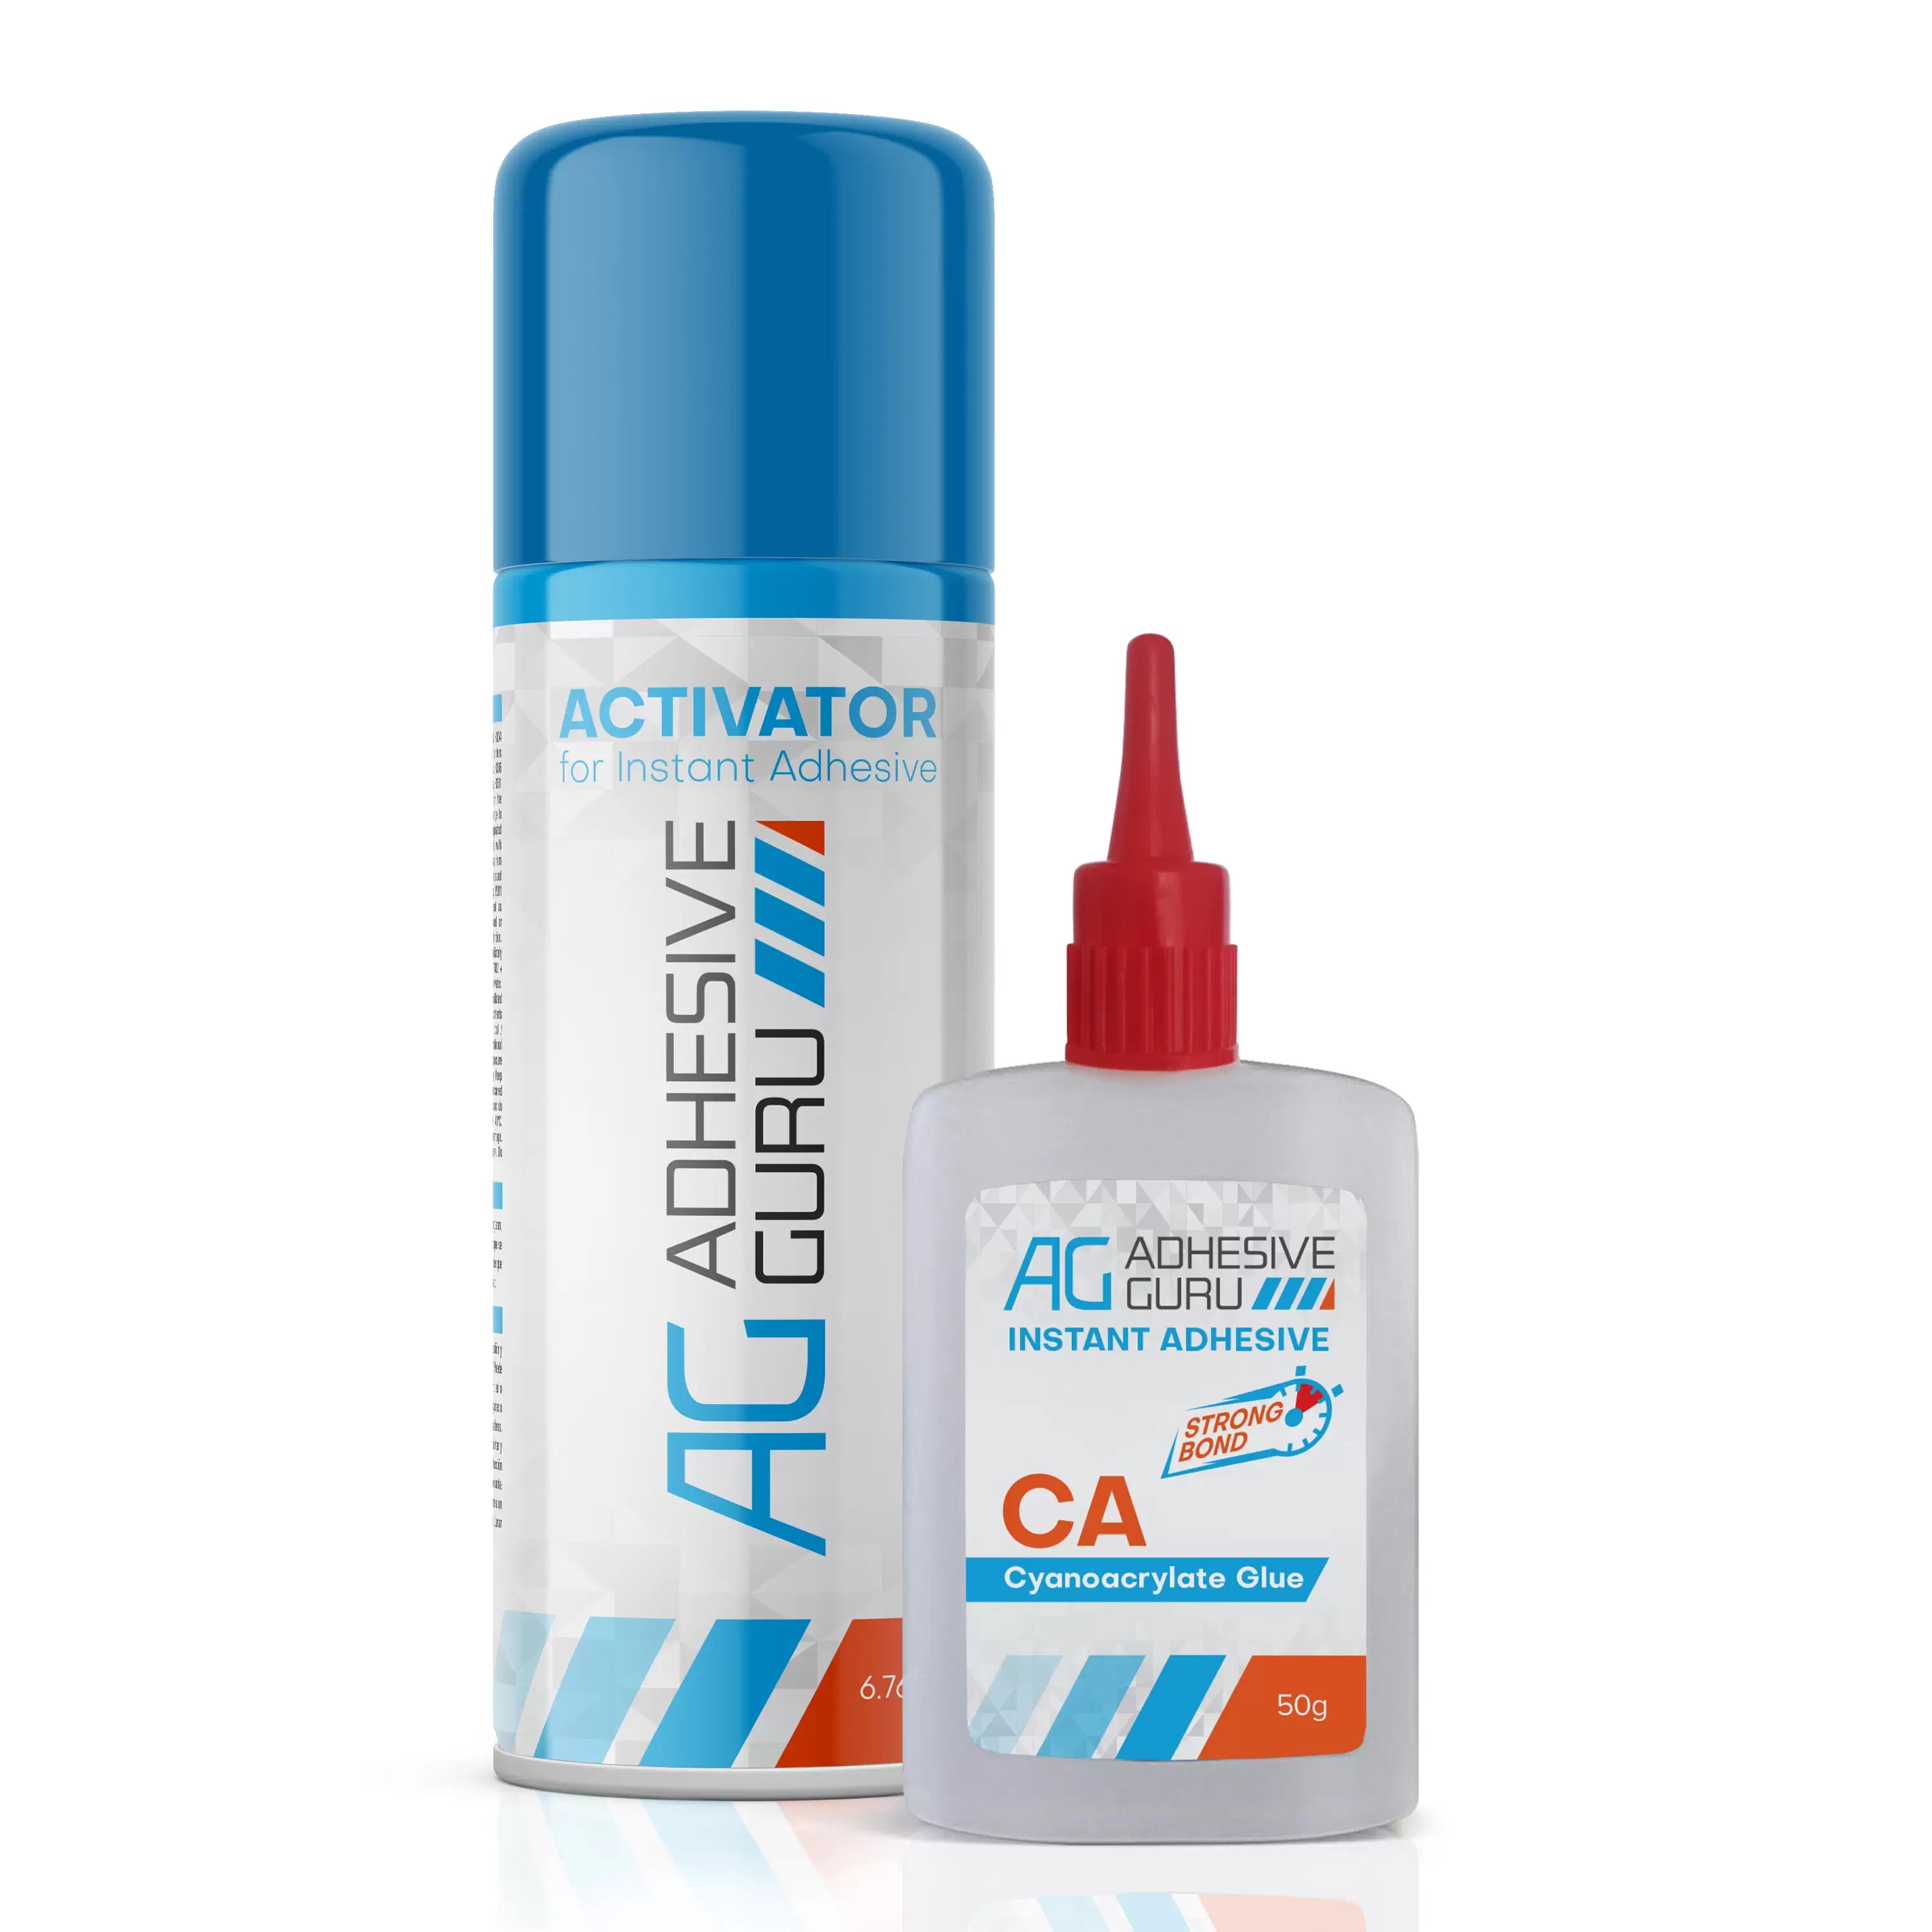  MITREAPEL Ca Glue with Activator (2 x 3.5 oz - 2 x 13.5 fl oz),  Ca Glue for Woodworking, Cyanoacrylate Glue and Activator for Wood,  Plastic, Metal, Leather, Ceramic and Craft 